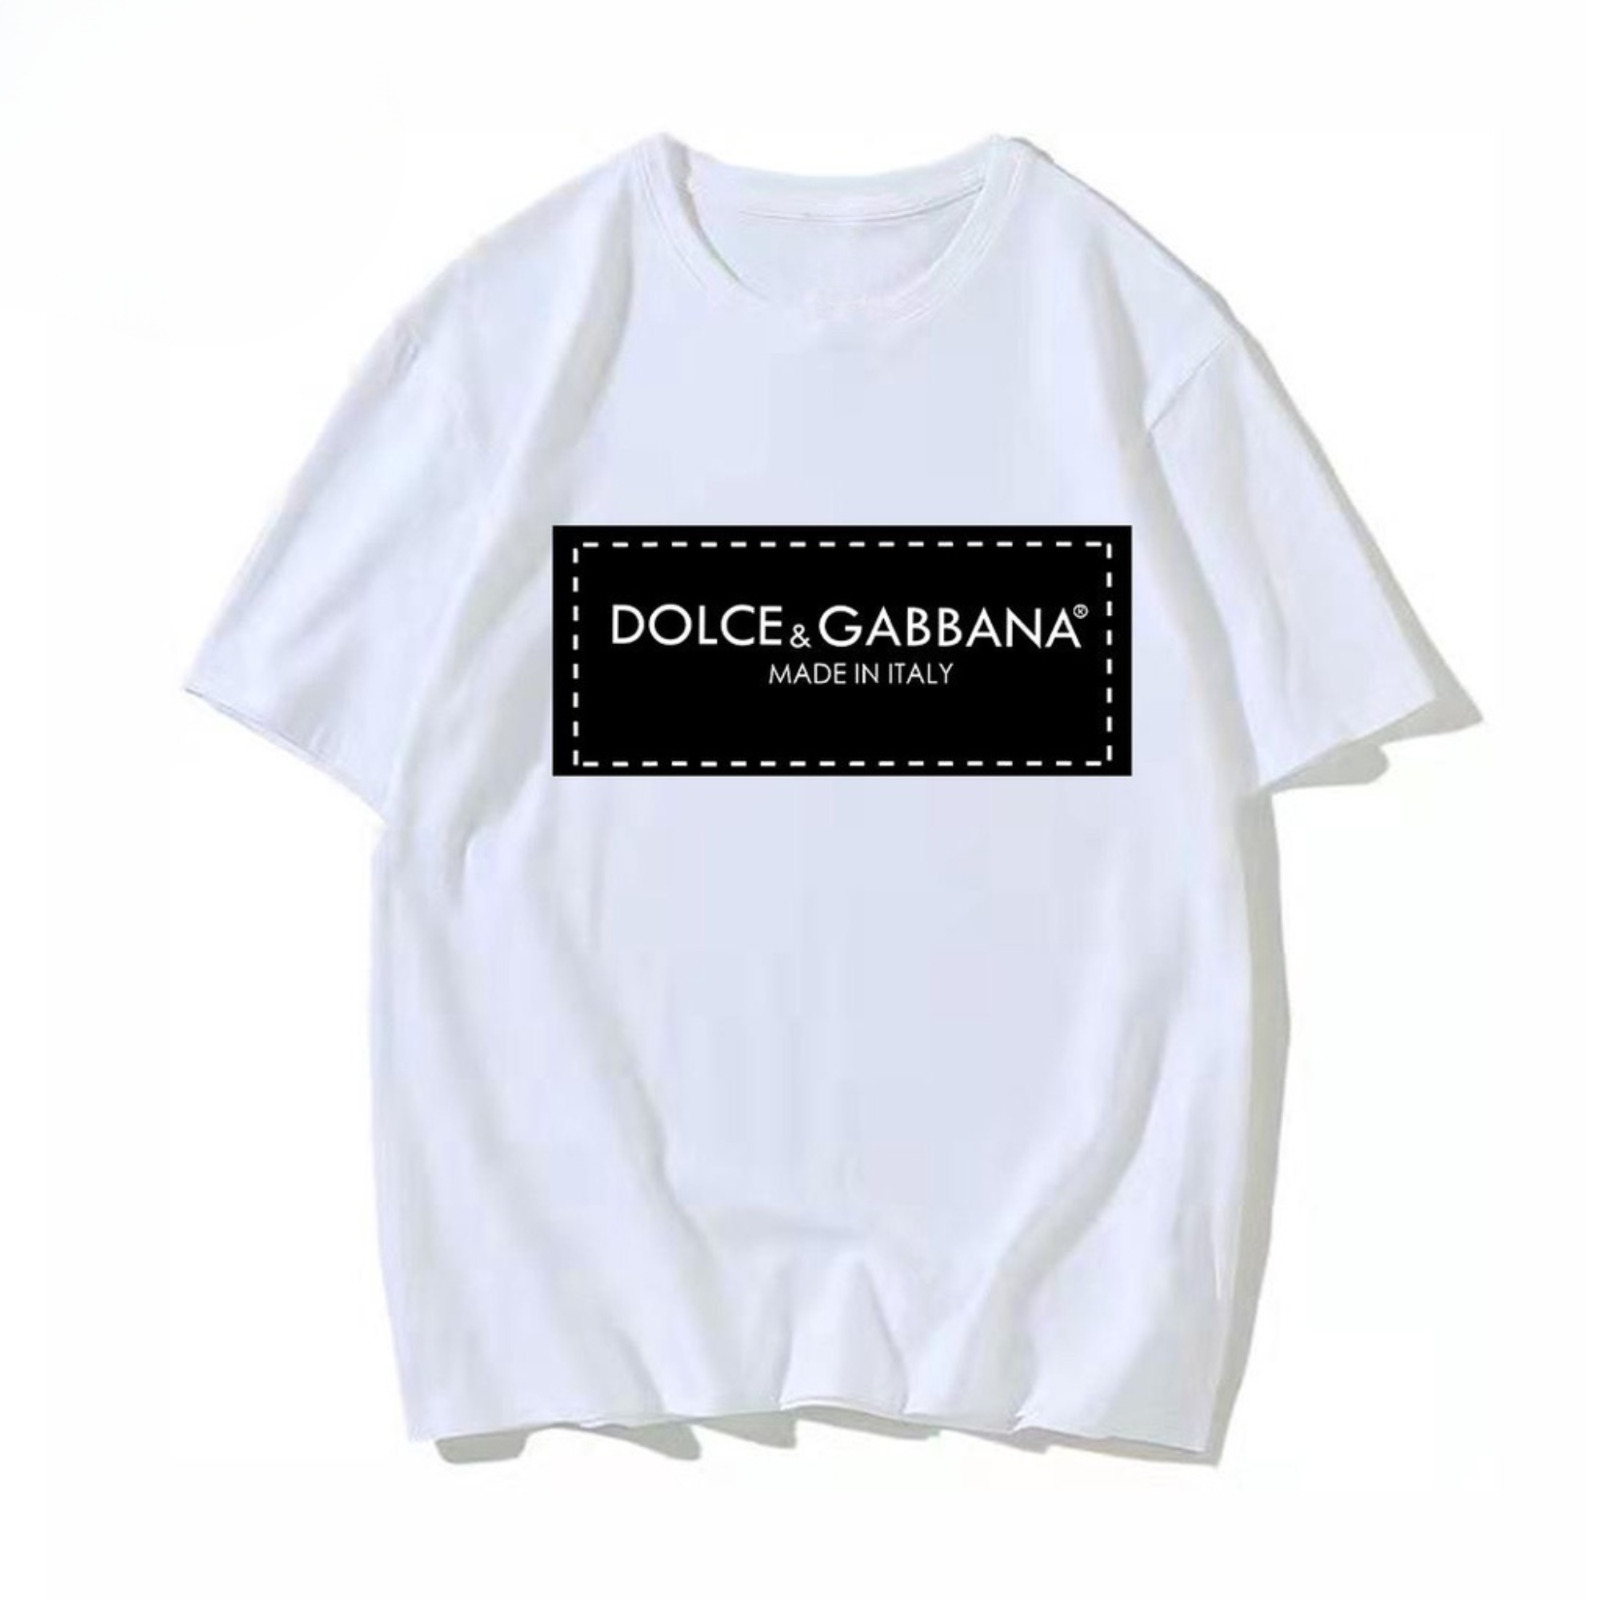 HOT SALE Dolce & Gabbana Fanmade Printed Unisex Shirt Full Size US, S-5XL